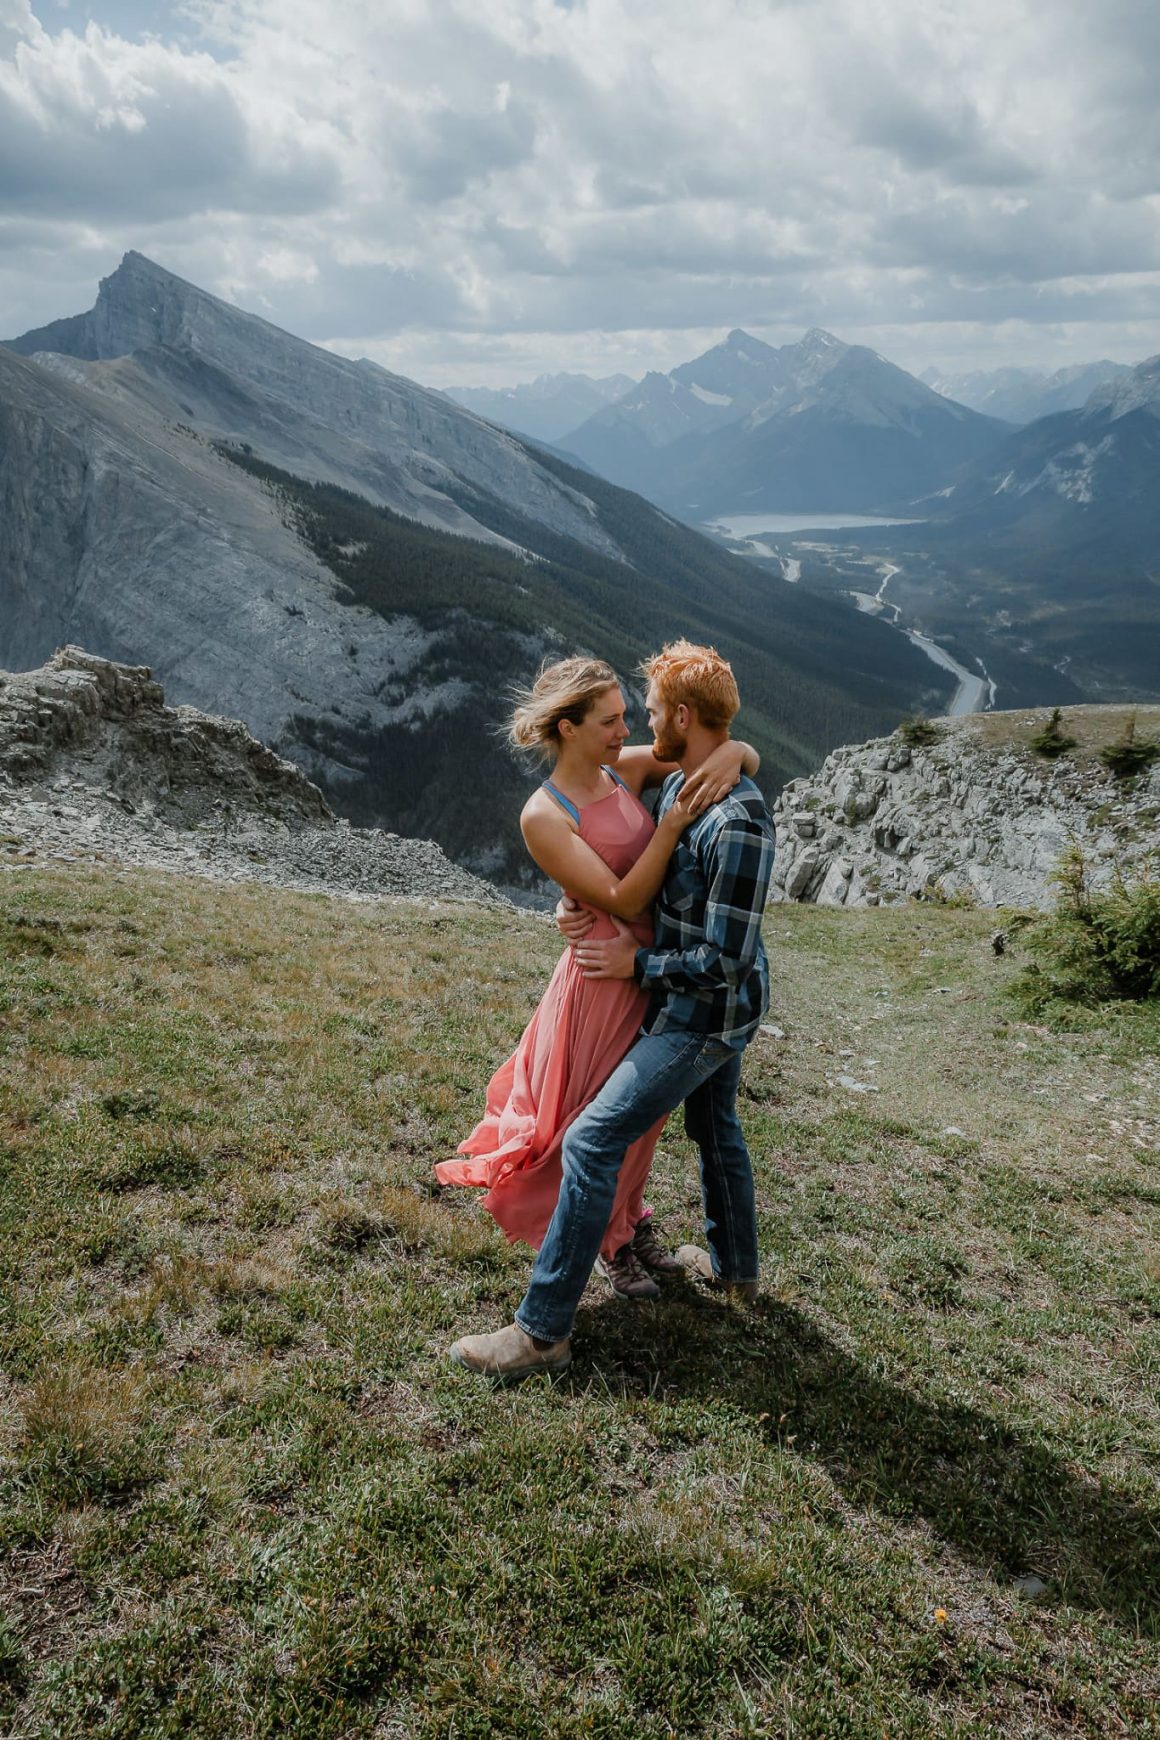 sarah-and-tim-engagement-photos-on-top-of-a-mountain-lake-louise-in-canadian-rockies-canmore-banff-lake-louise-alberta-adventurous-photographer-destination-photographer-36-9893683